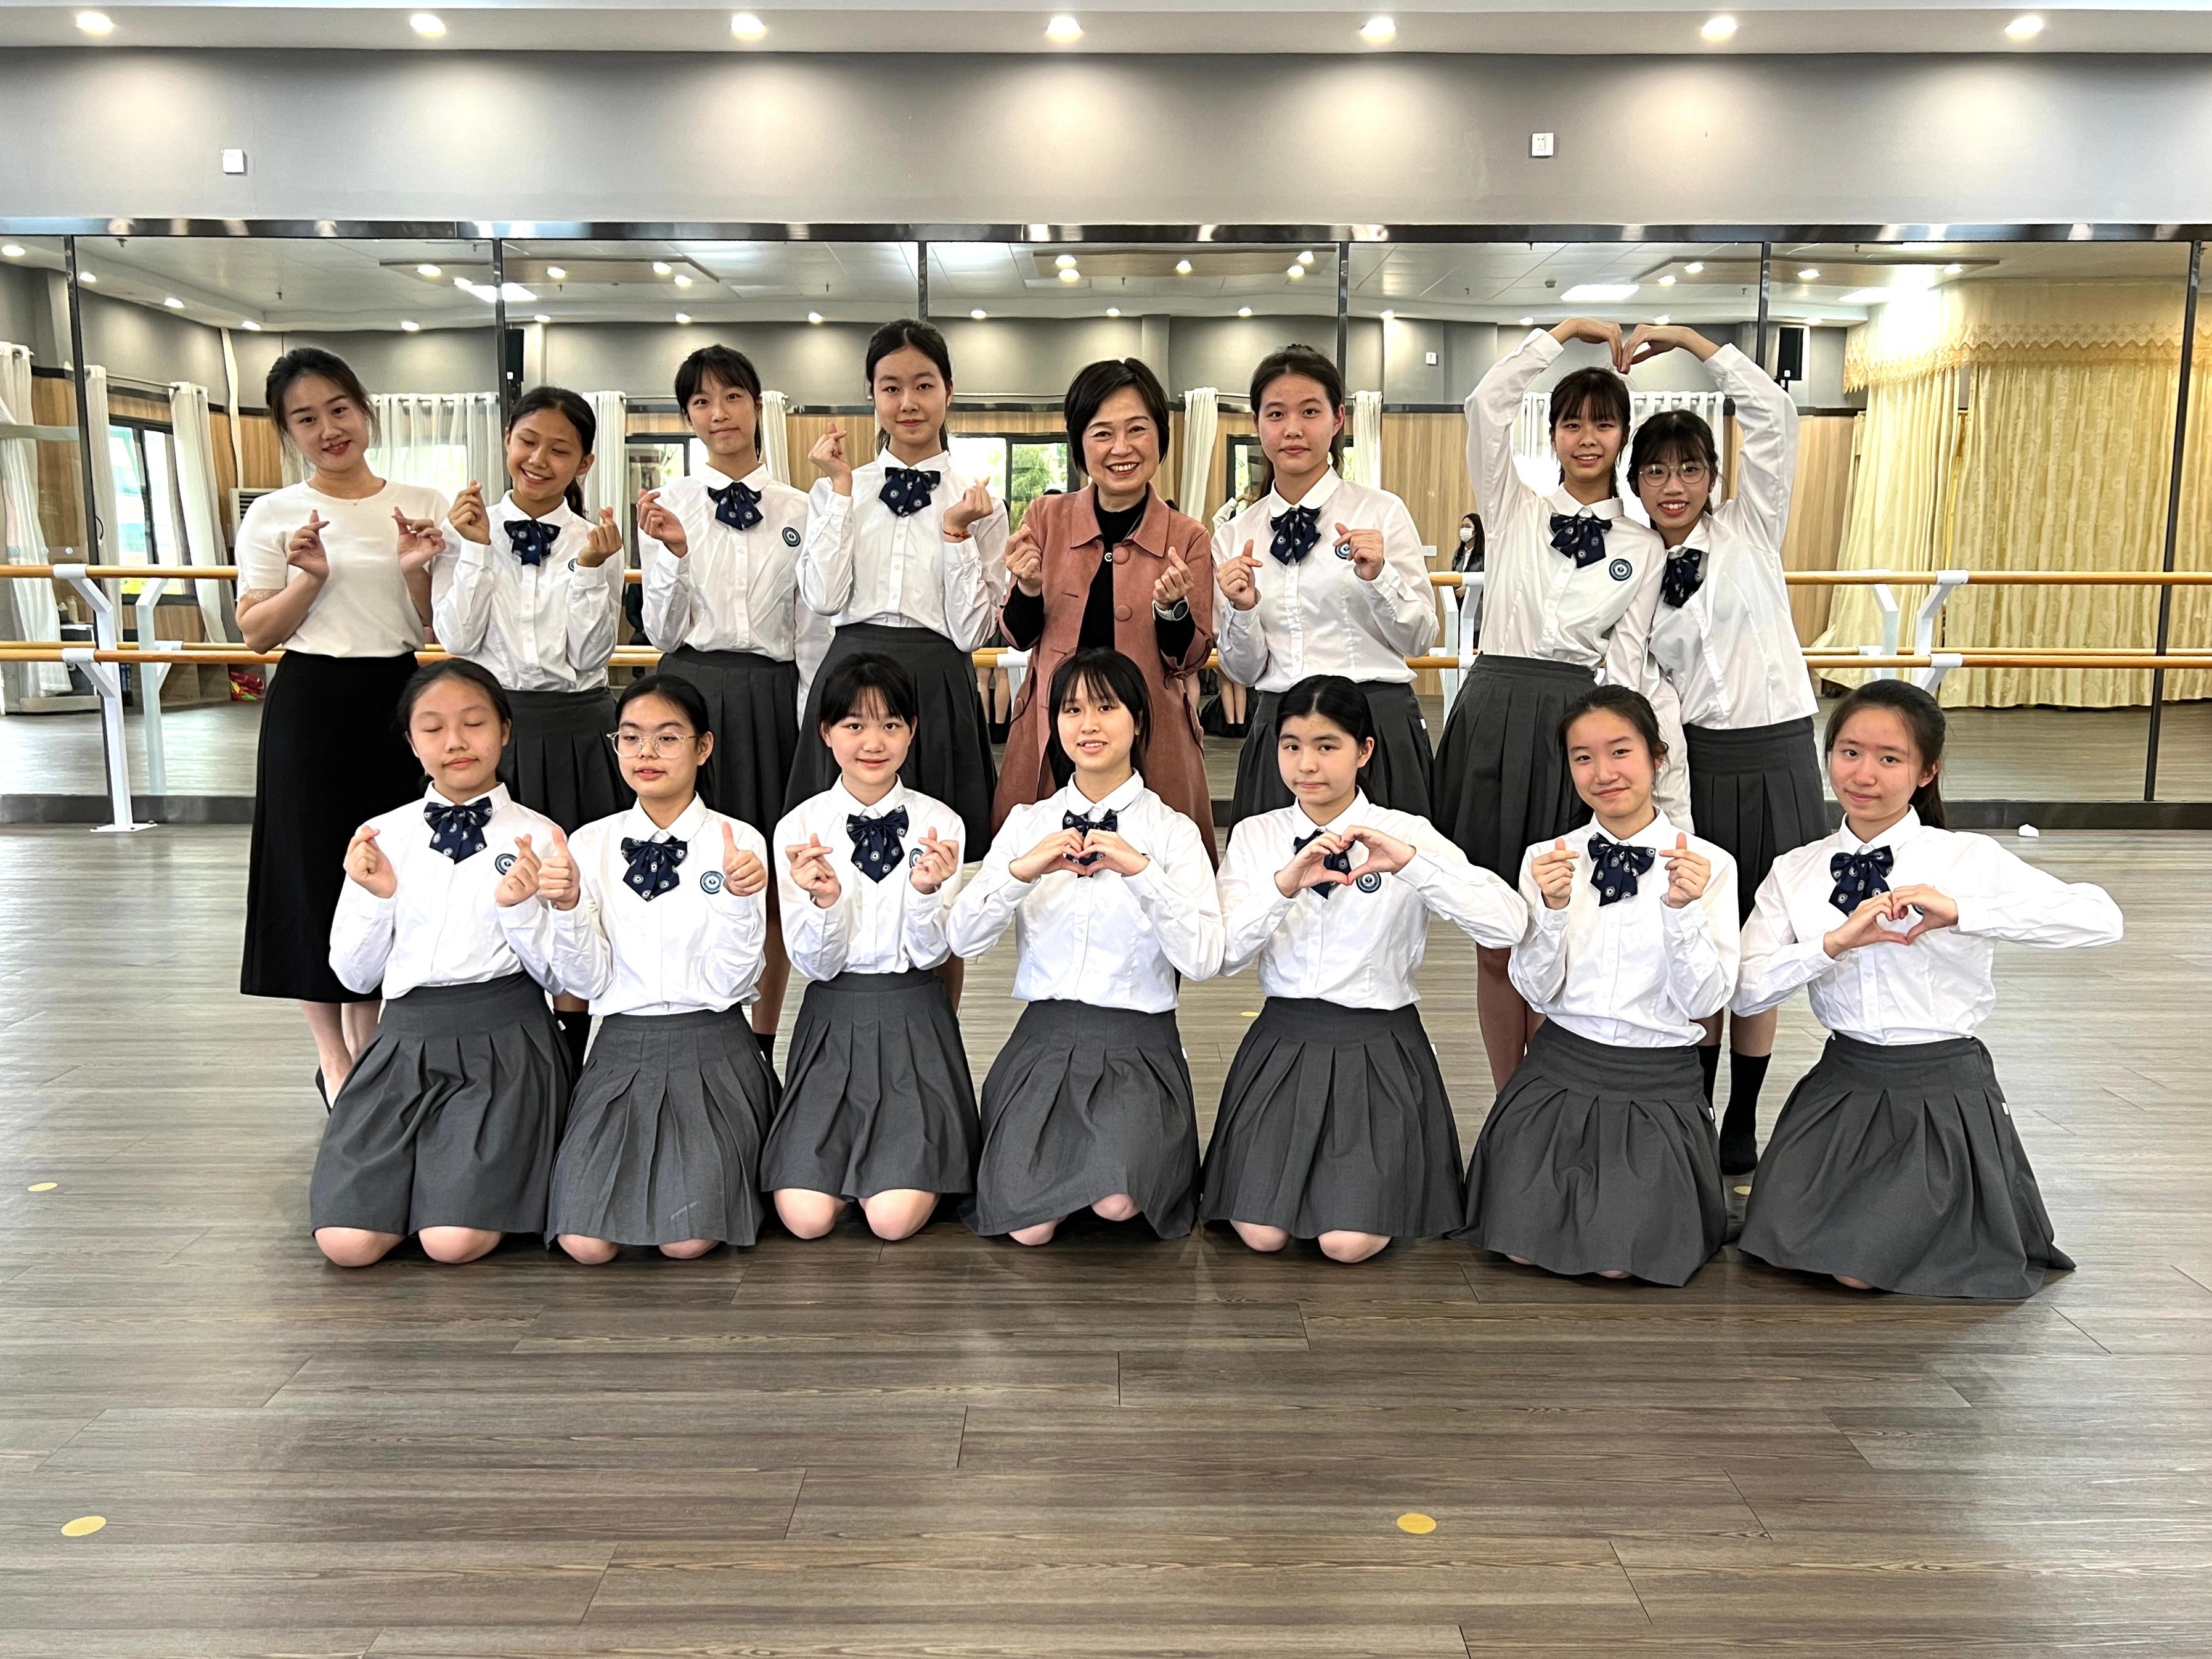 The Secretary for Education, Dr Choi Yuk-lin, today (March 8) visited the Affiliated School of JNU for Hong Kong and Macao Students in Guangzhou to understand more about the study situation of children of Hong Kong people on the Mainland. Photo shows Dr Choi (back row, fourth right) with the teacher and students of a dance performance.